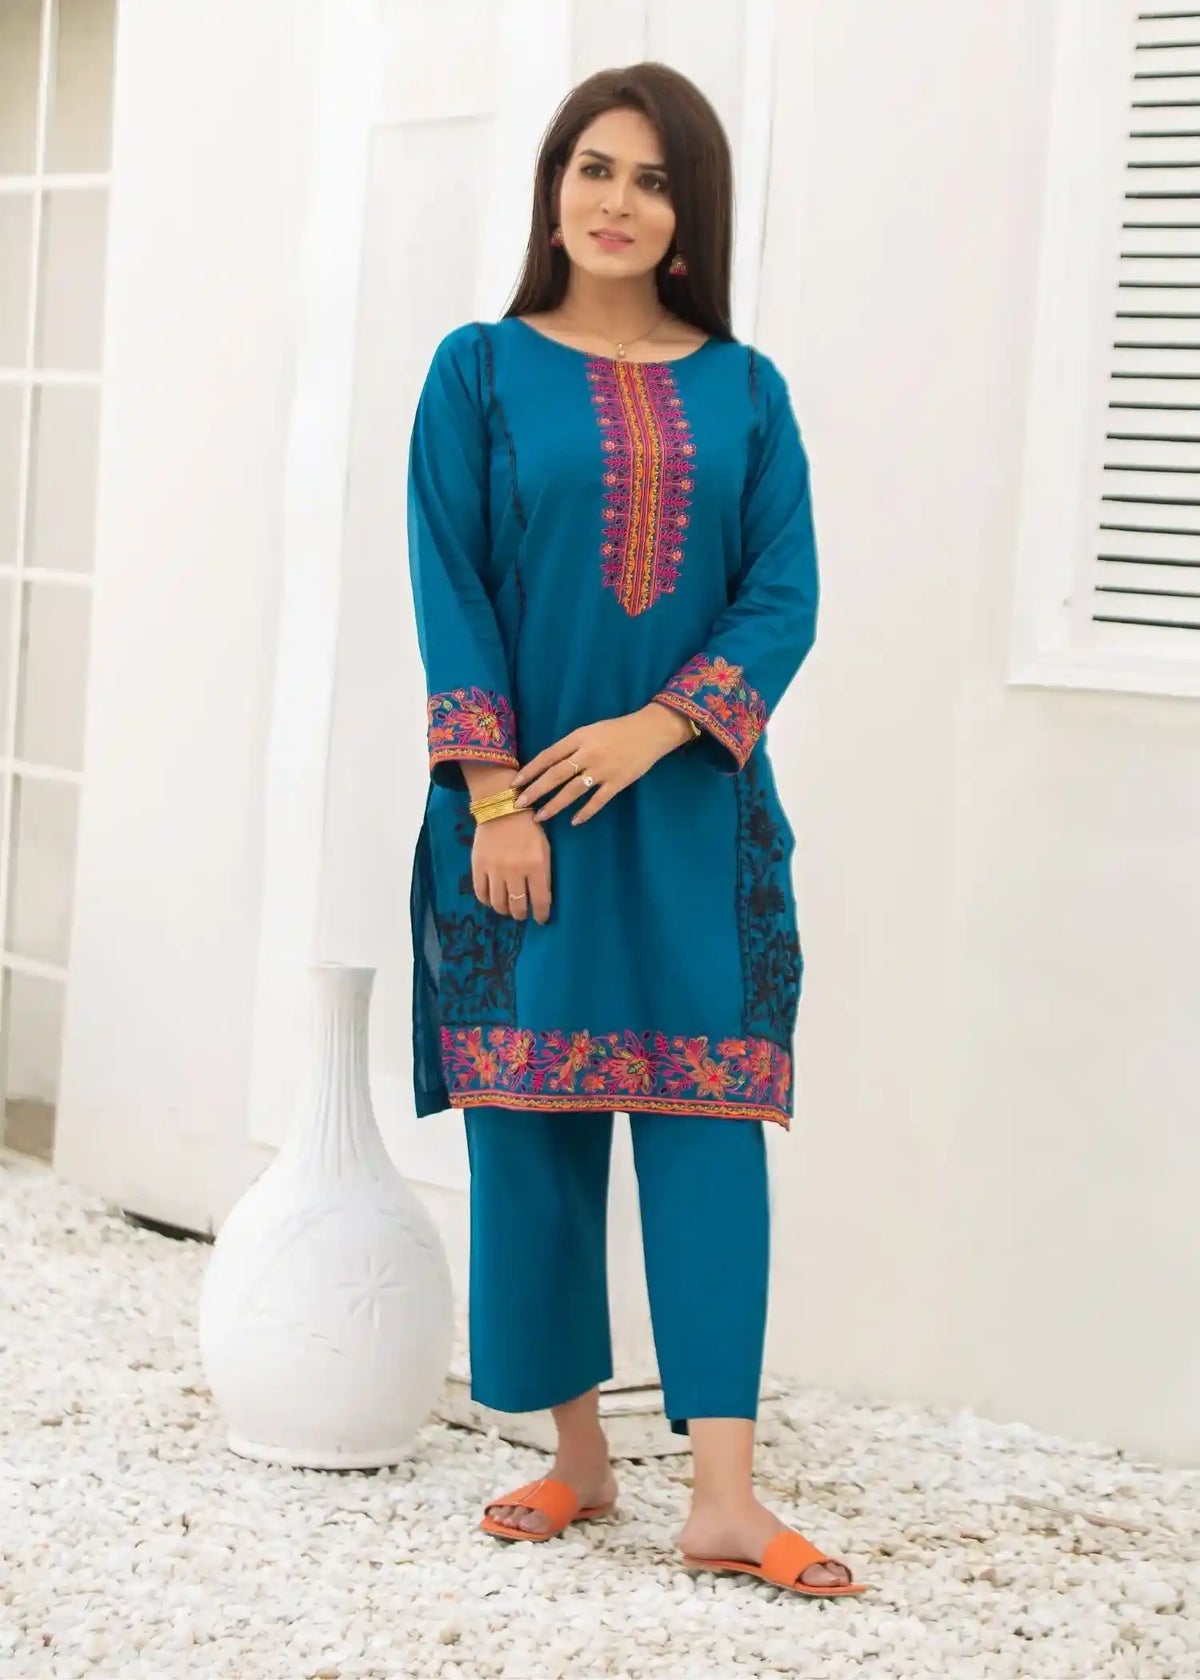 Embroidered Cotton Two-Piece art-592